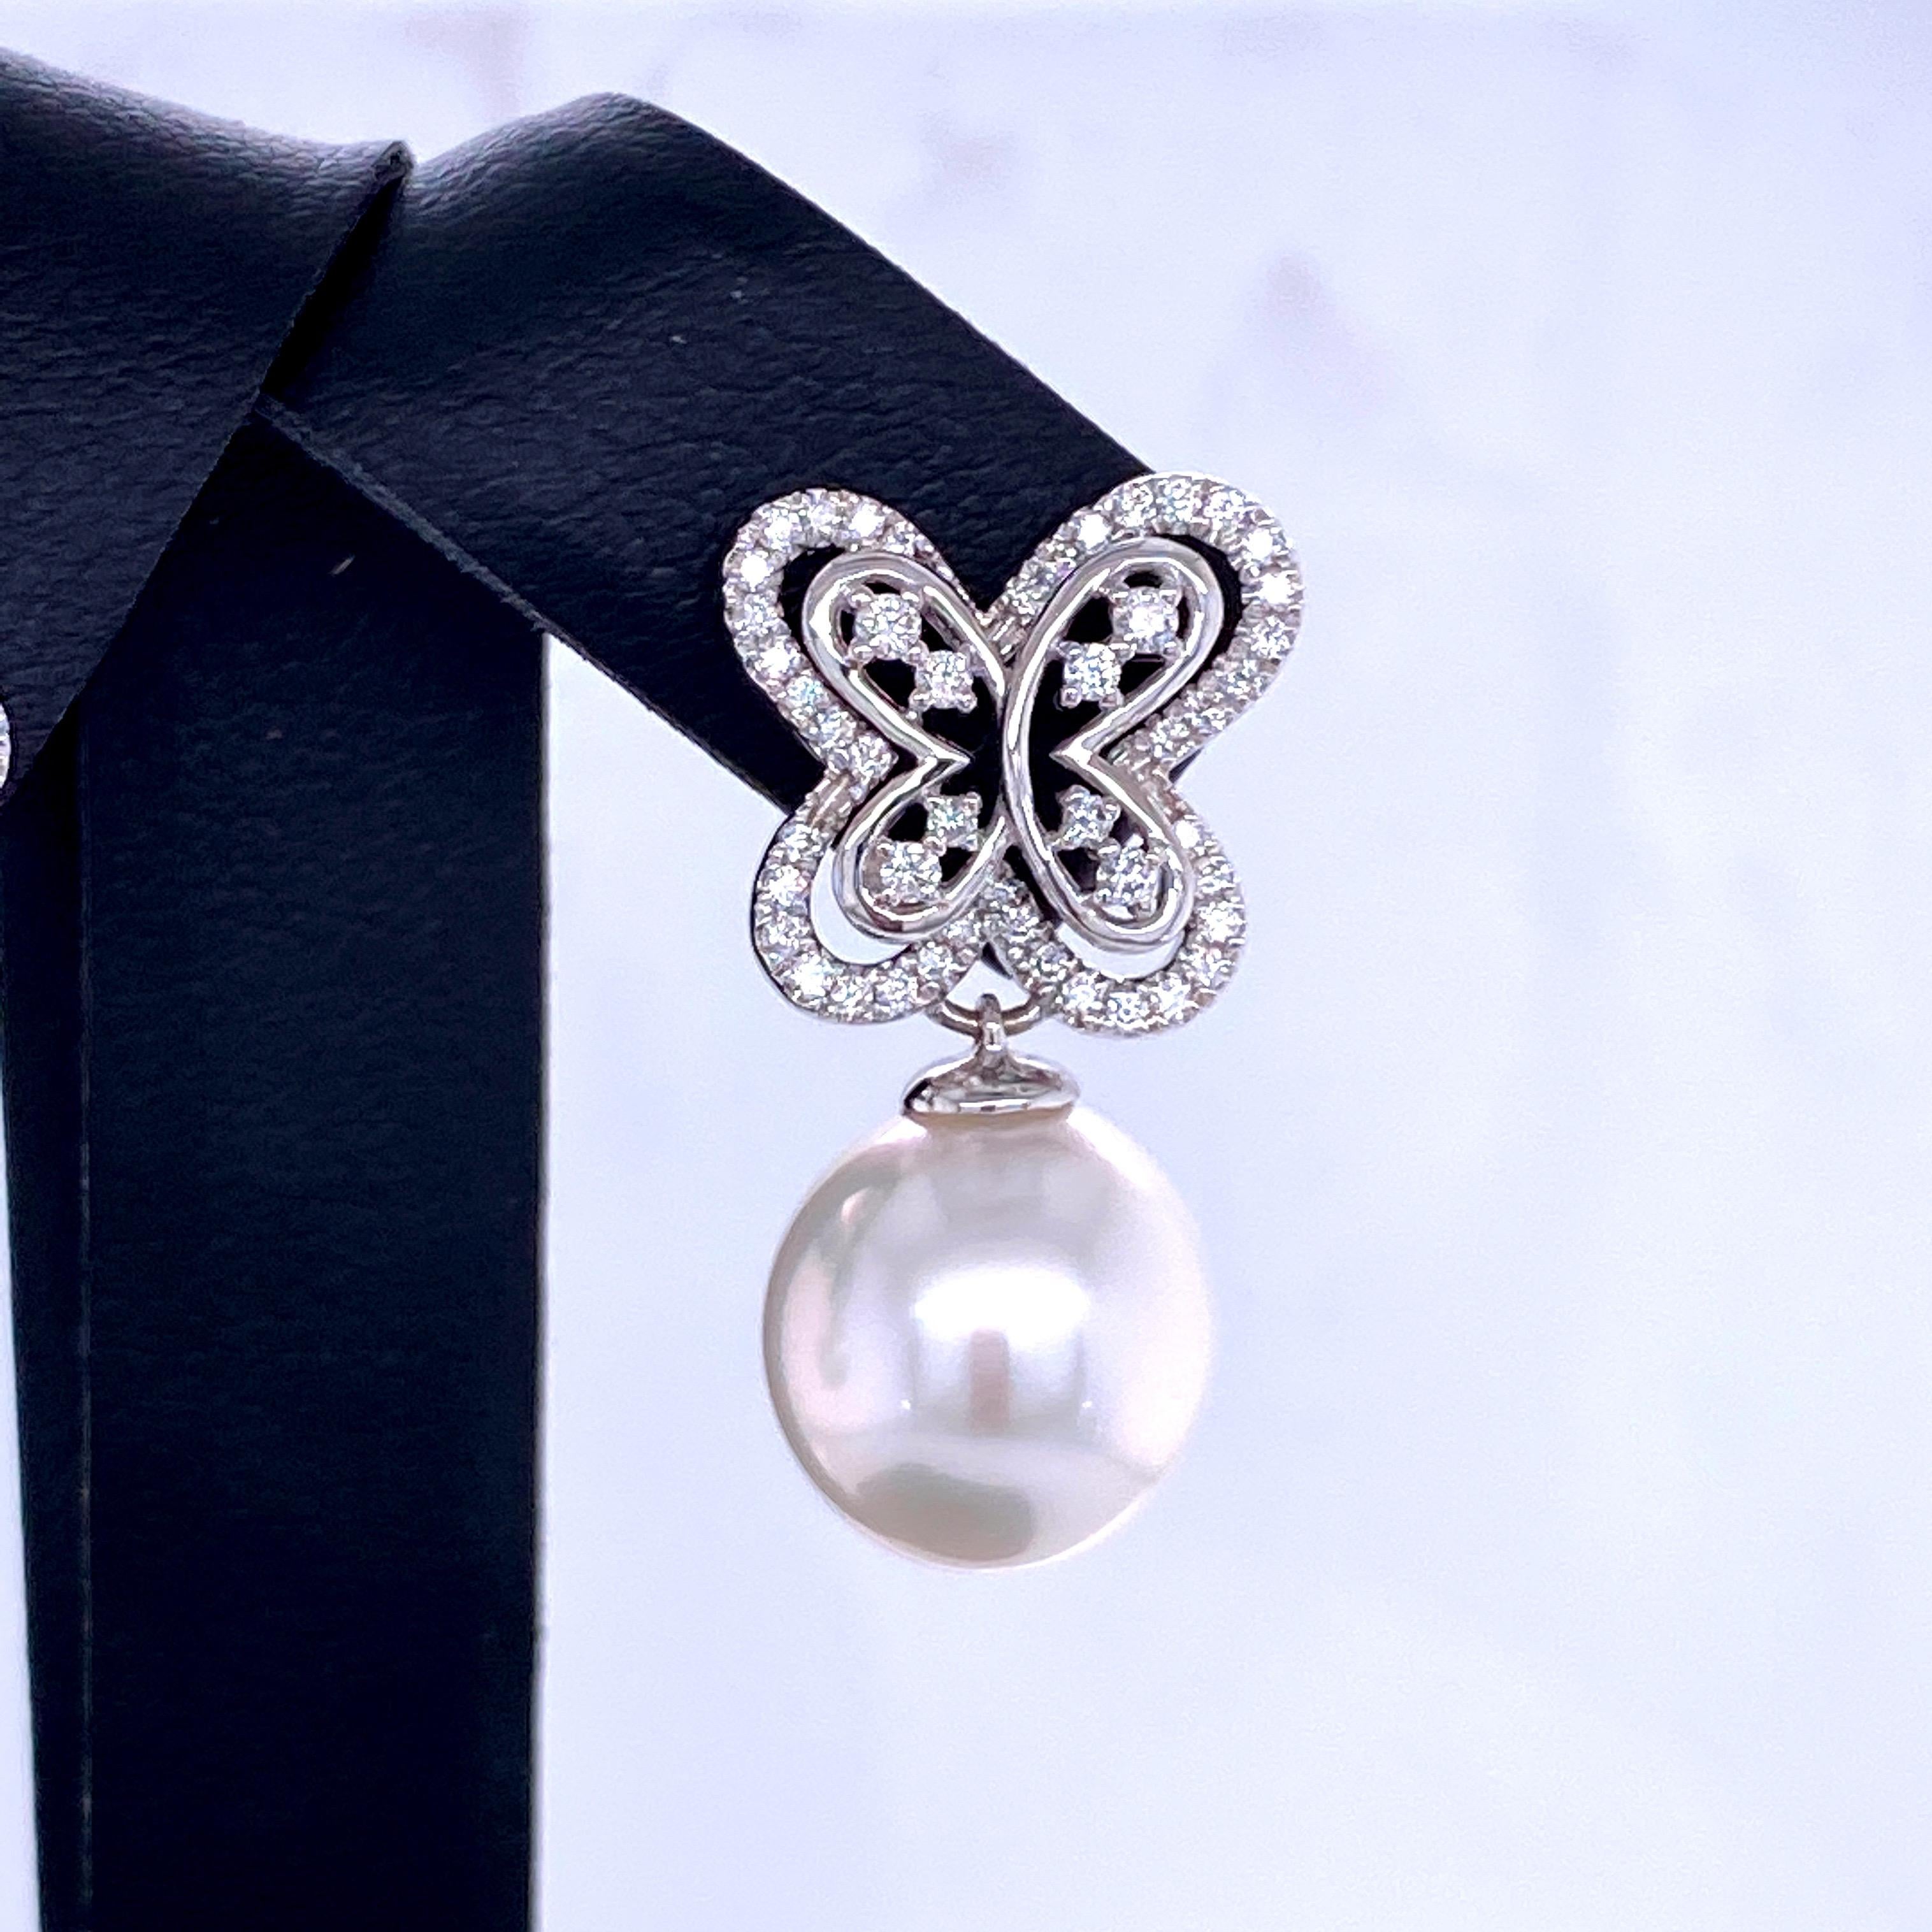 18K White gold drop earrings featuring two South Sea Pearls measuring 11-12 mm with a diamond butterfly motif containing 96 round brilliants weighing 0.54 carats.
Color G-H
Clarity SI